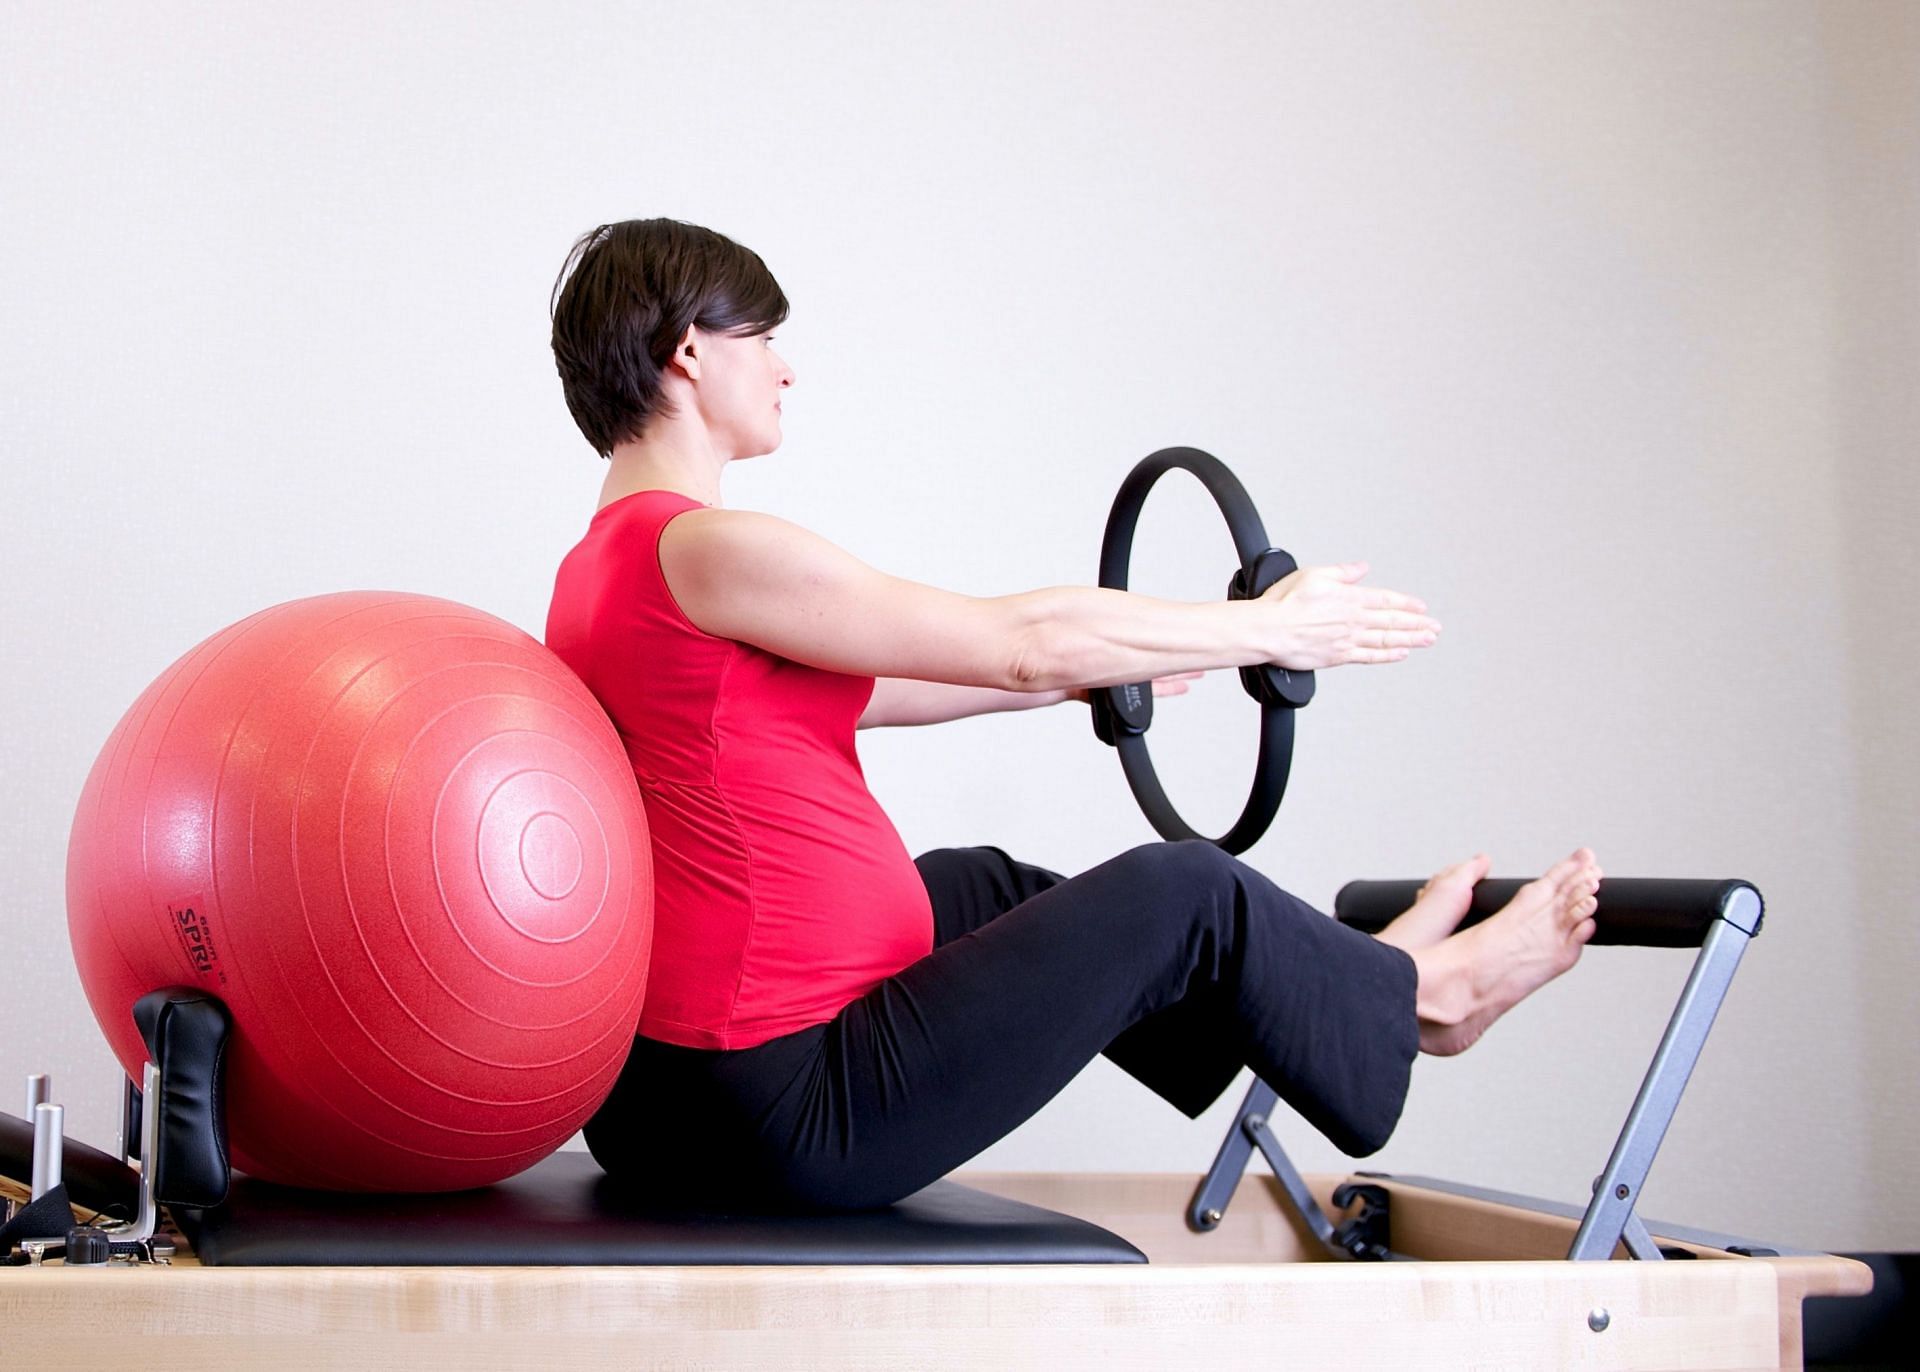 Exercises for pregnant women are important for well-being of both mother and baby. (Image via Pexels/ Jessica Monte)